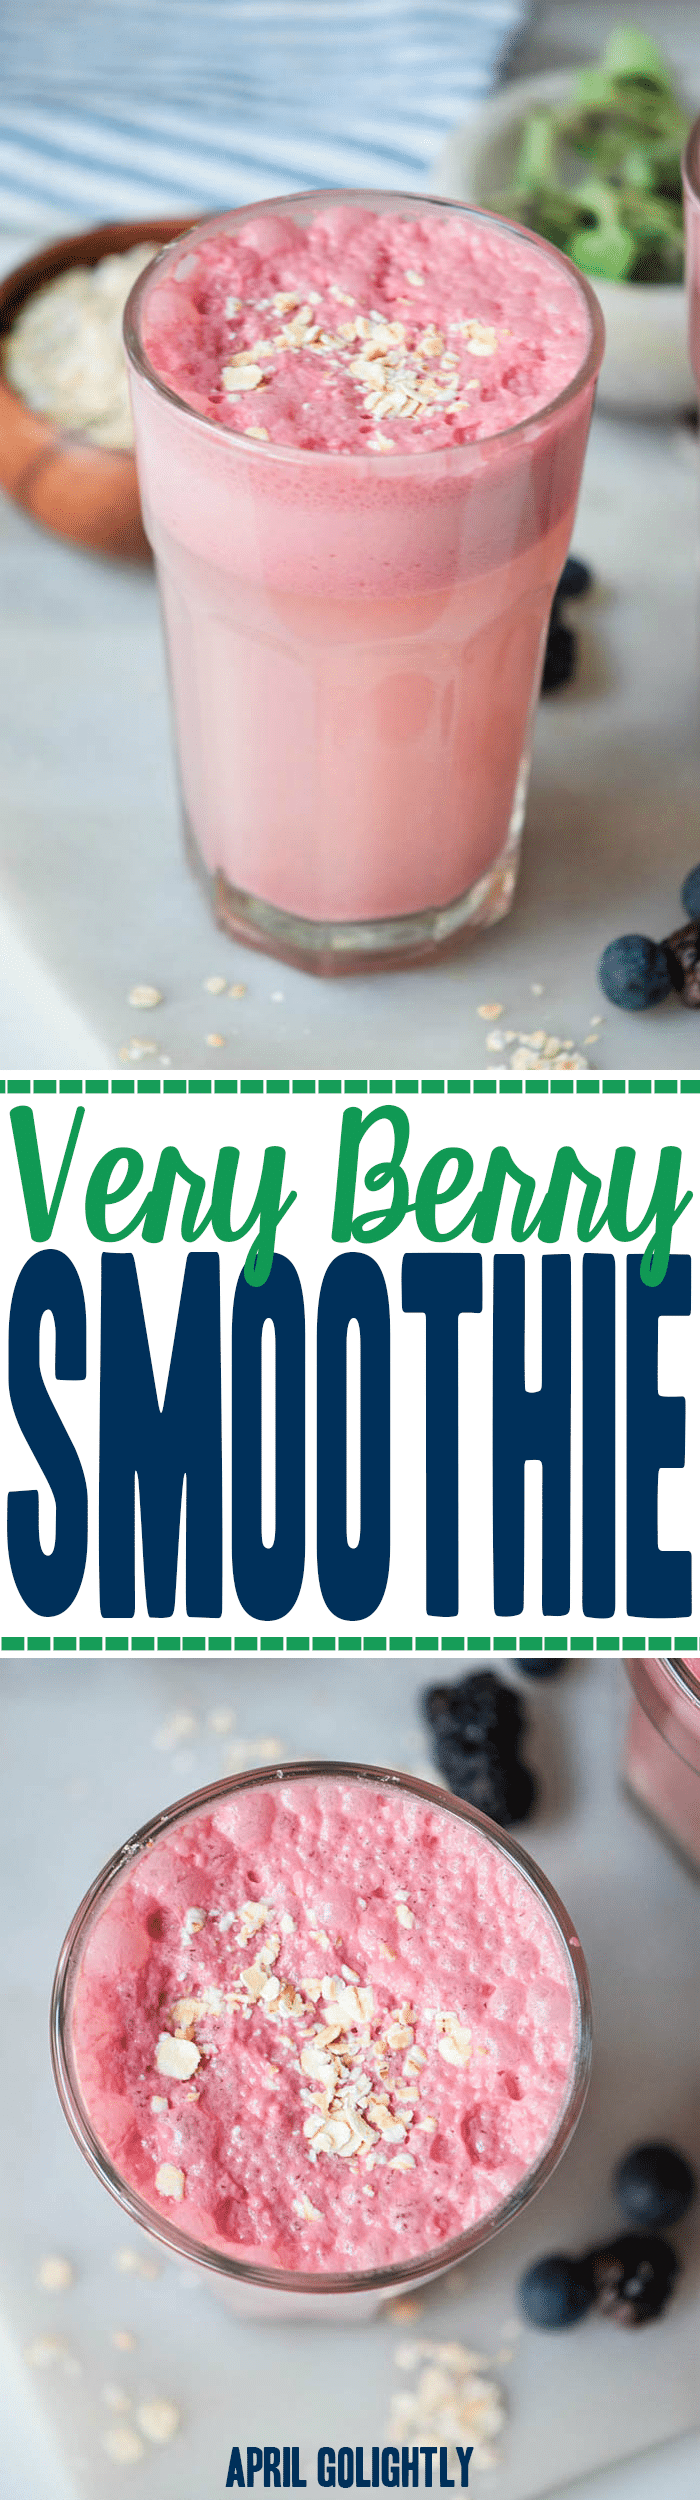 Easy Berry Smoothie Recipe made with almond milk, raspberries, blueberries, blackberries, banana, and your favorite steel cut oats